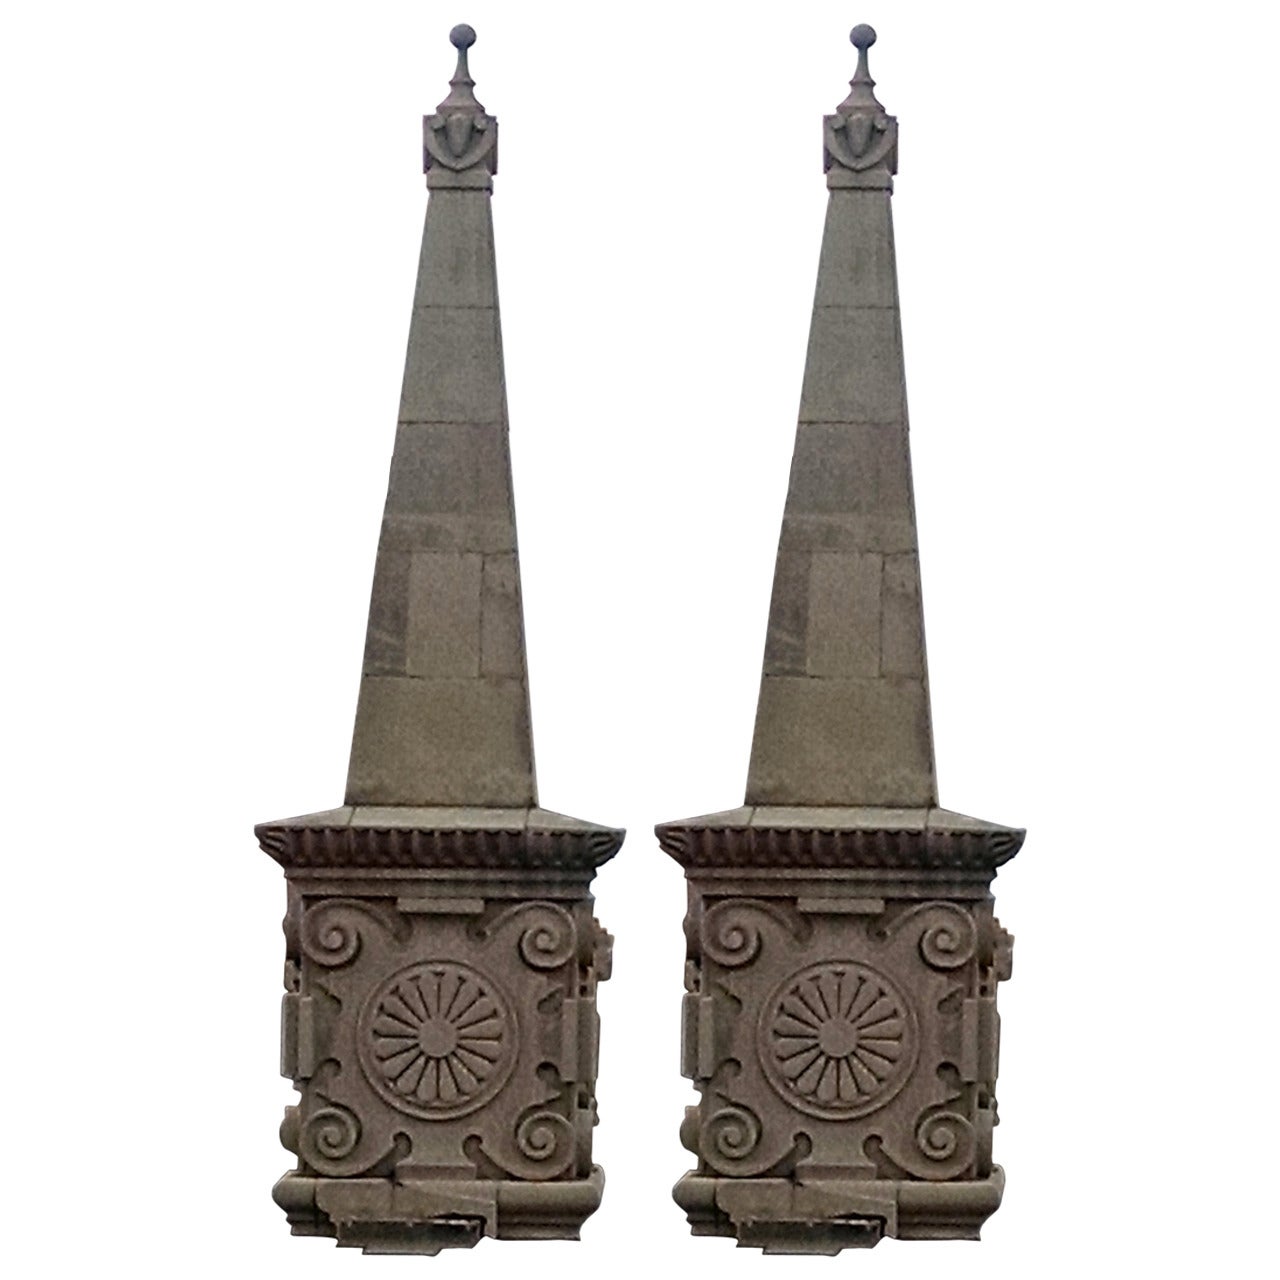 1896 Pair of Hand-Carved Limestone Obelisk Finials with Bases